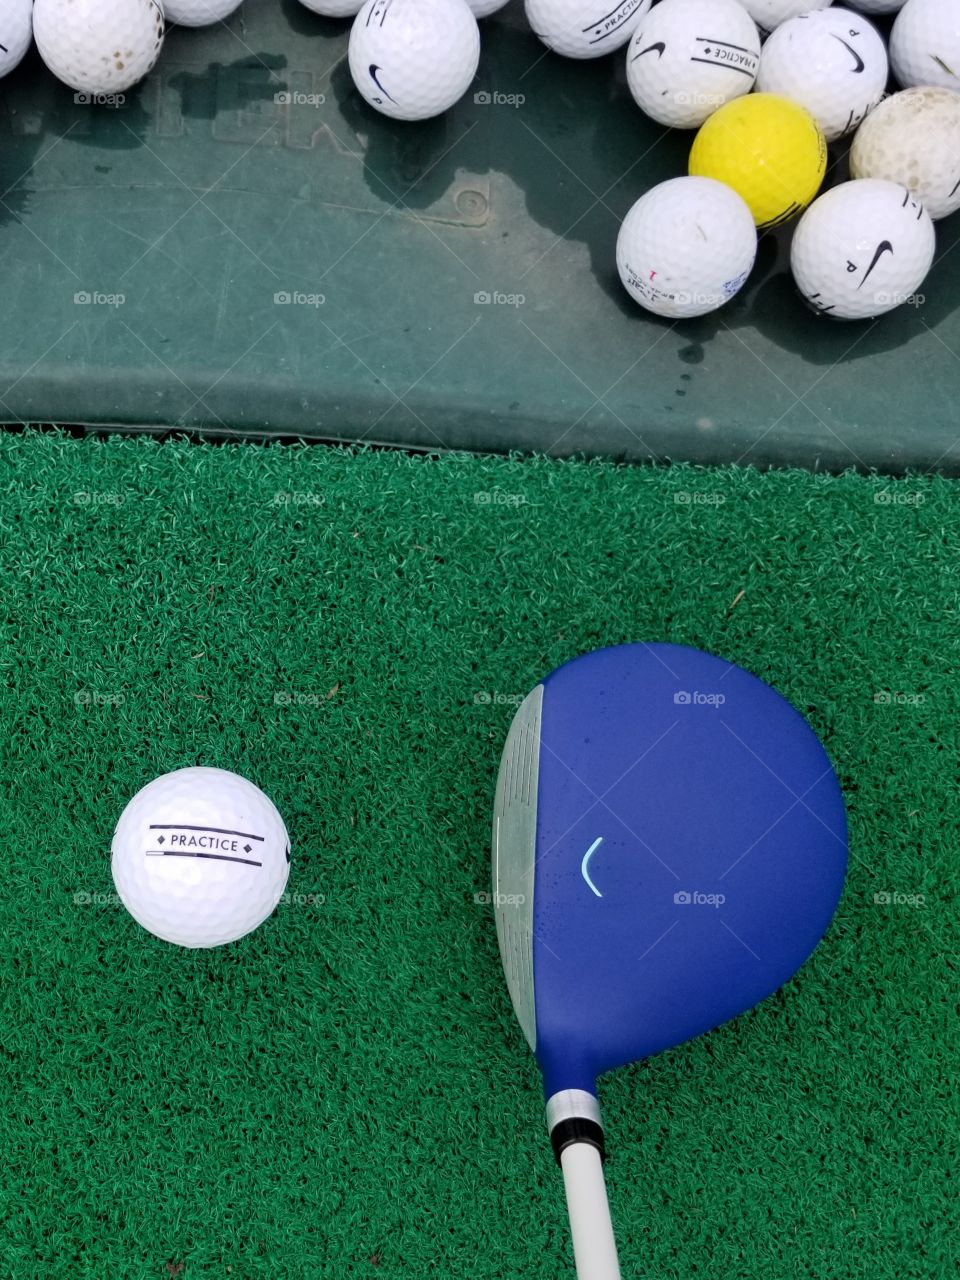 Practice makes perfect at the driving range